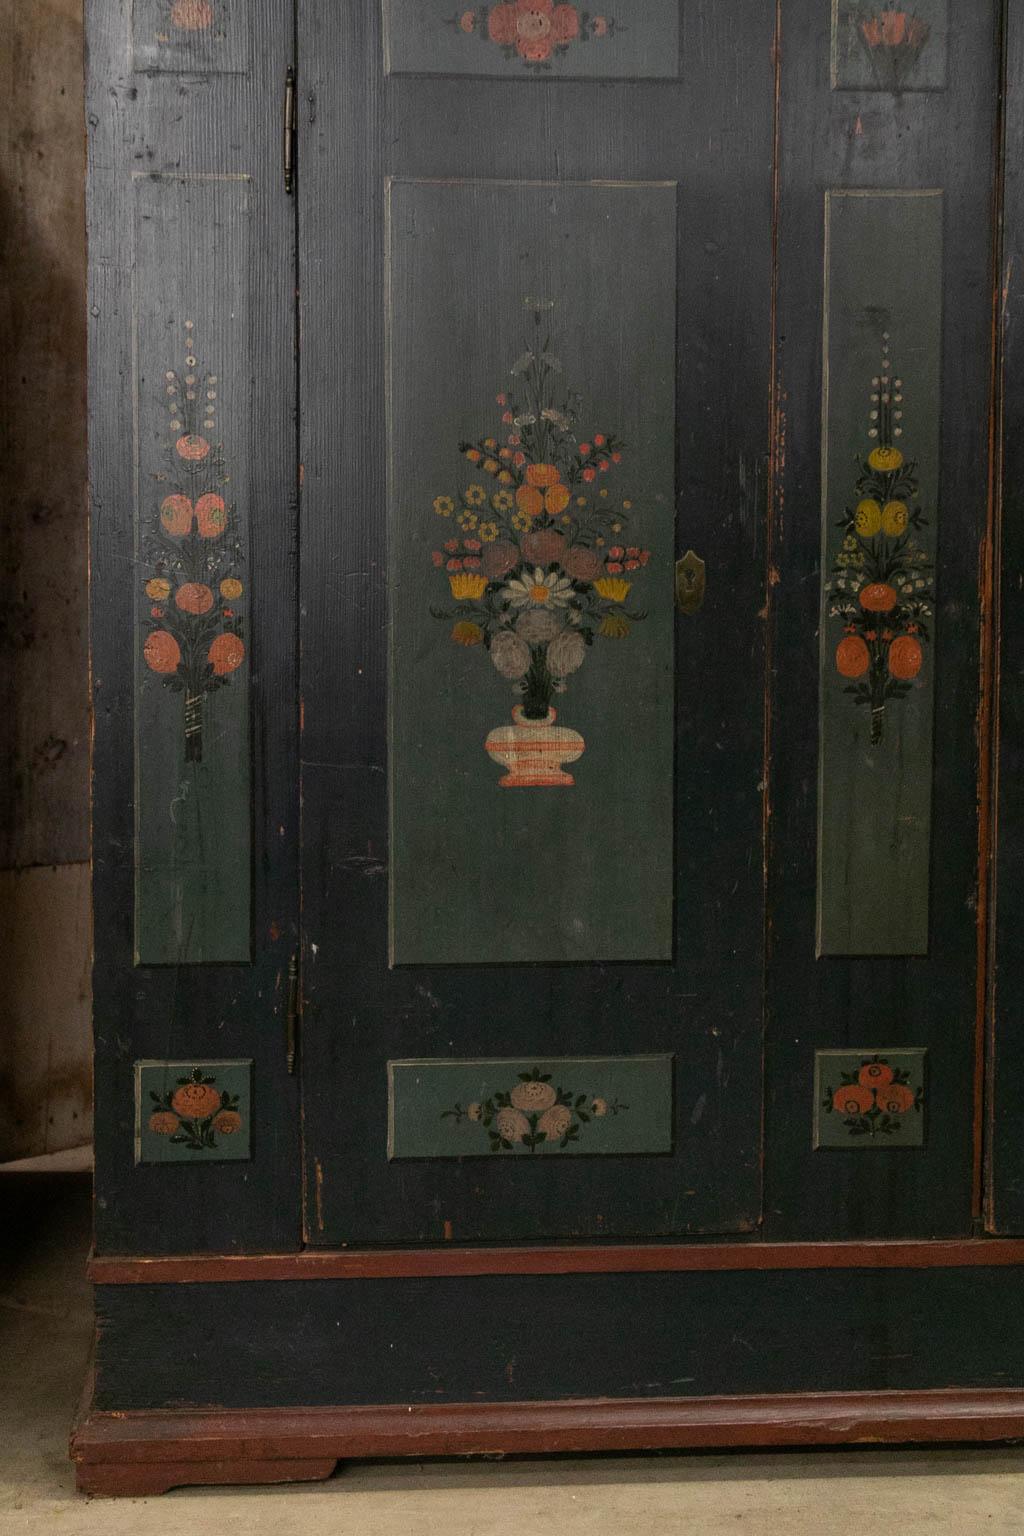 The interior of this armoire is fully open. The door's center panel and stiles are painted with floral decoration. The name and date is painted in the frieze. The right hand door has had a crack repaired. The sides are also painted with three floral